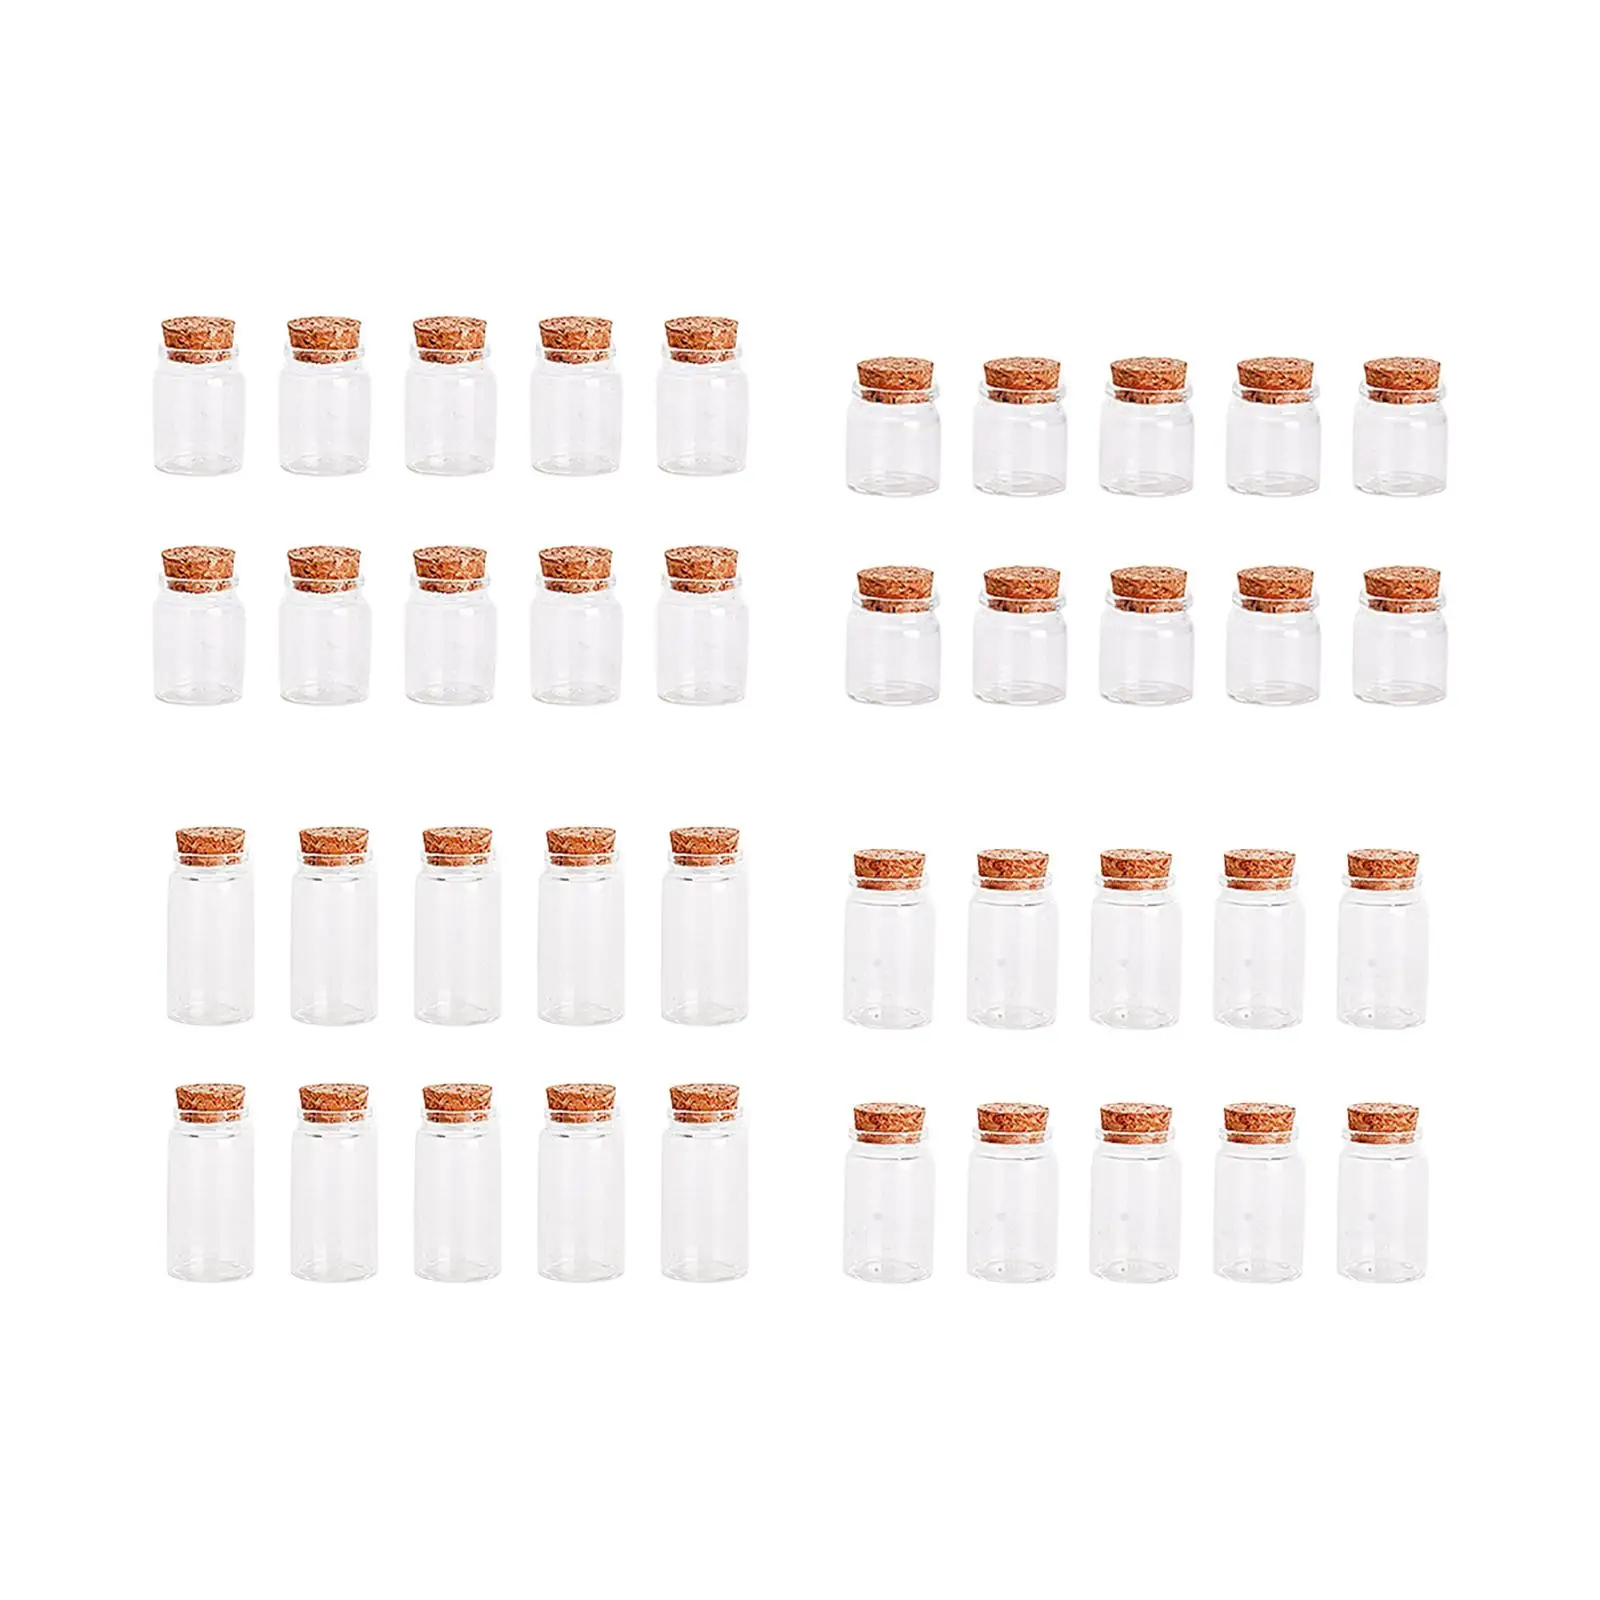 10Pcs Drifting Bottles Small Glass Jars Empty Container Wish Glass Jars Mini Glass Bottle for Wedding Favors Home Decoration